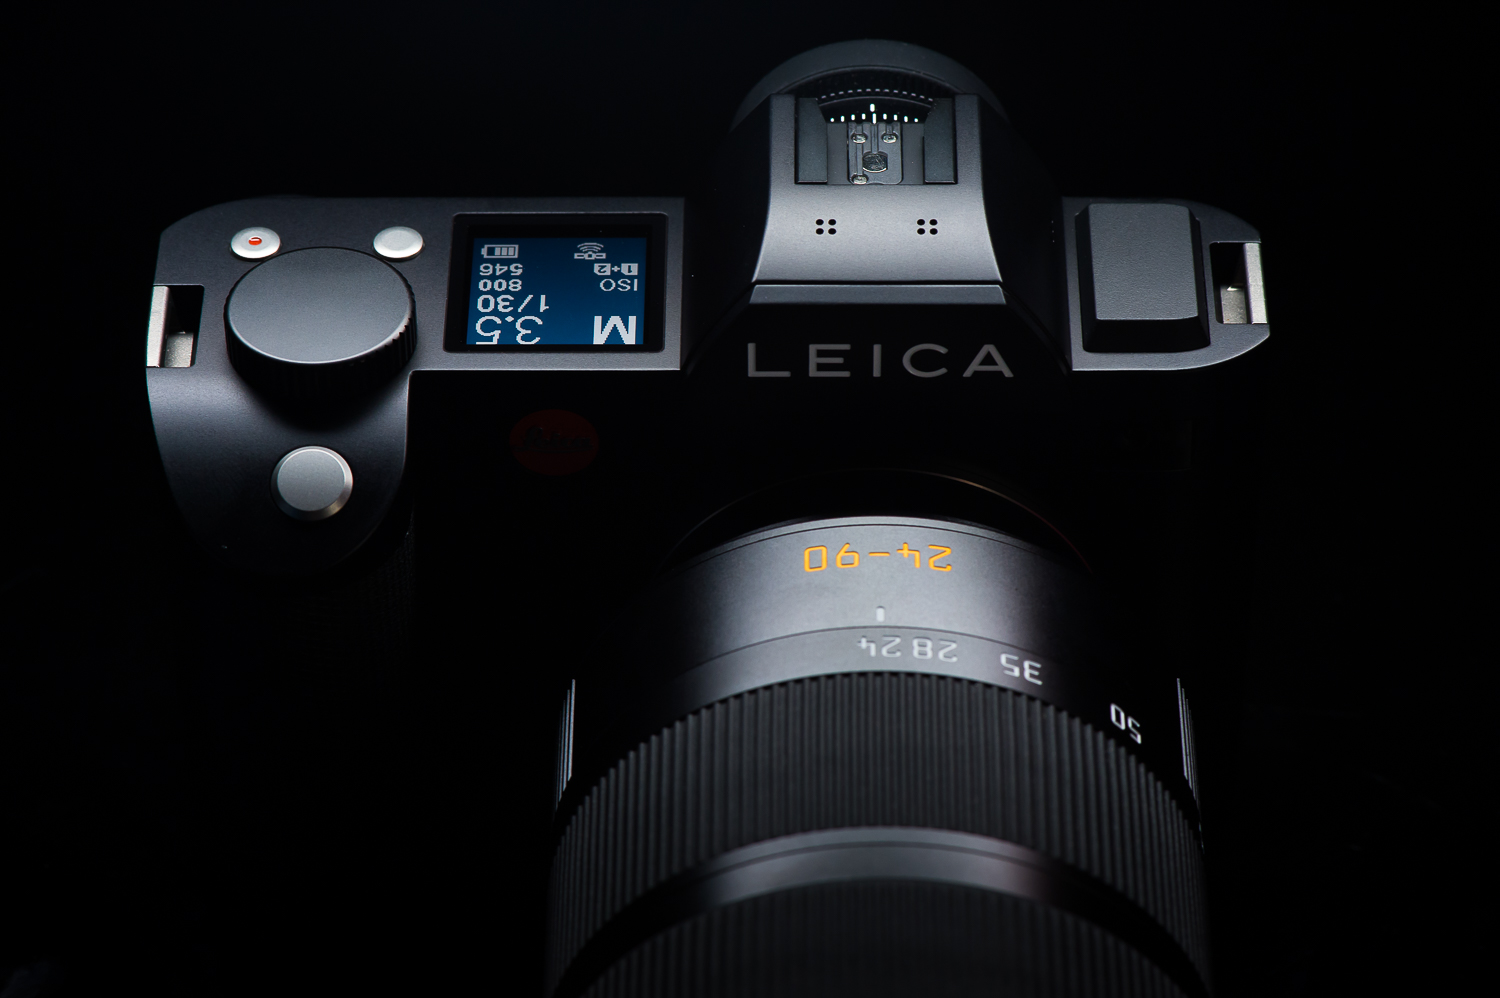 The Leica SL (type 601) Professional Mirrorless Camera Review 